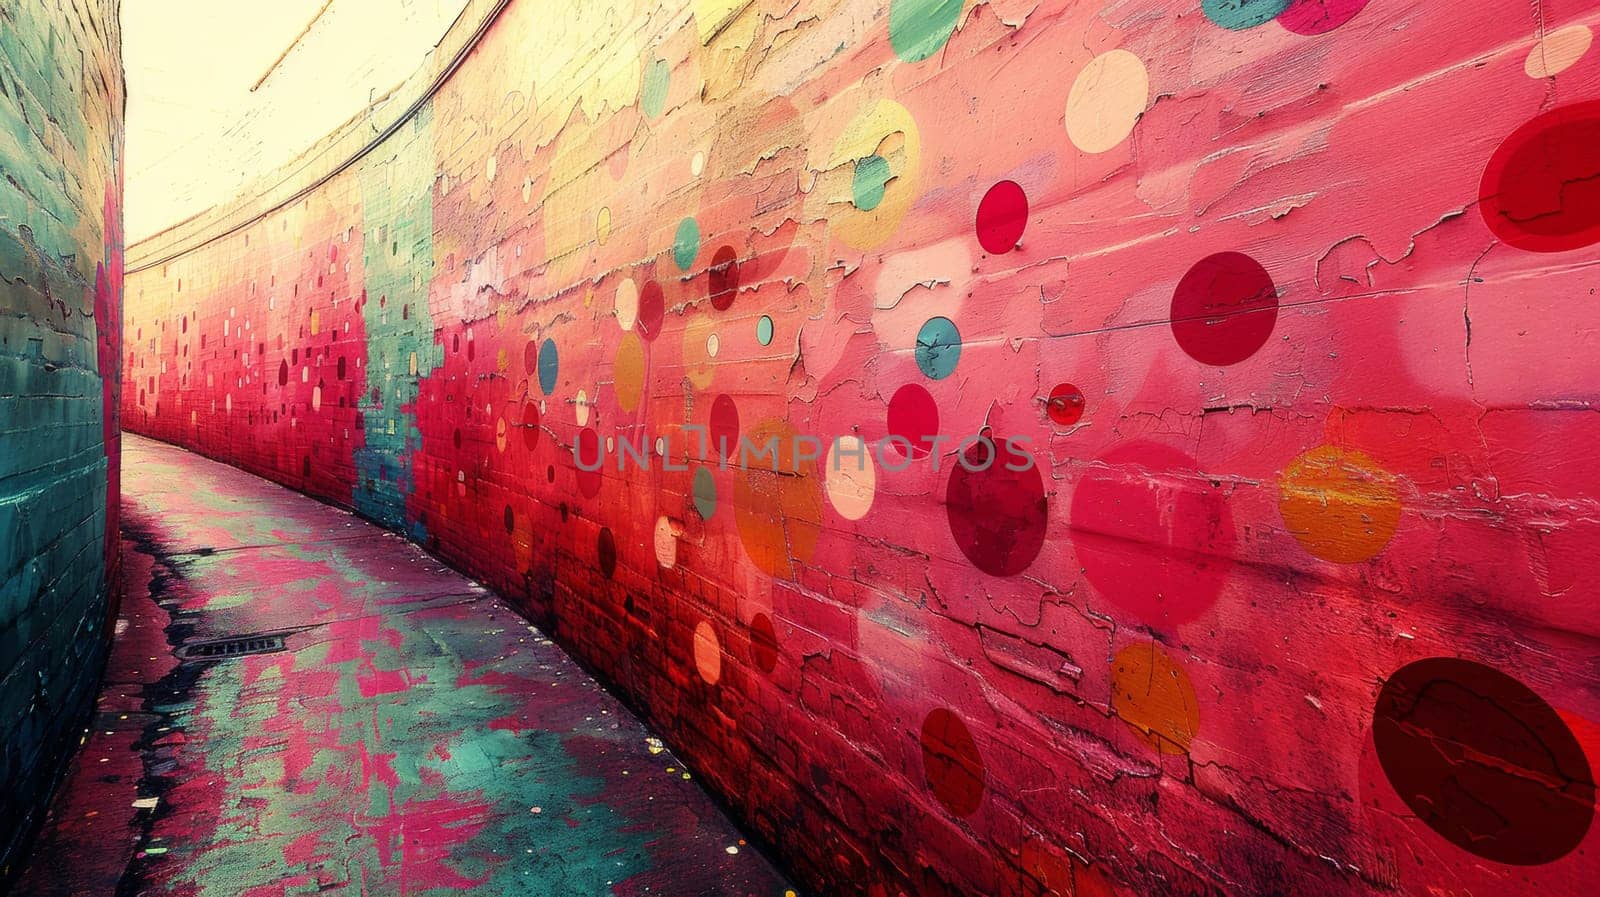 A colorful wall with many polka dots painted on it, AI by starush